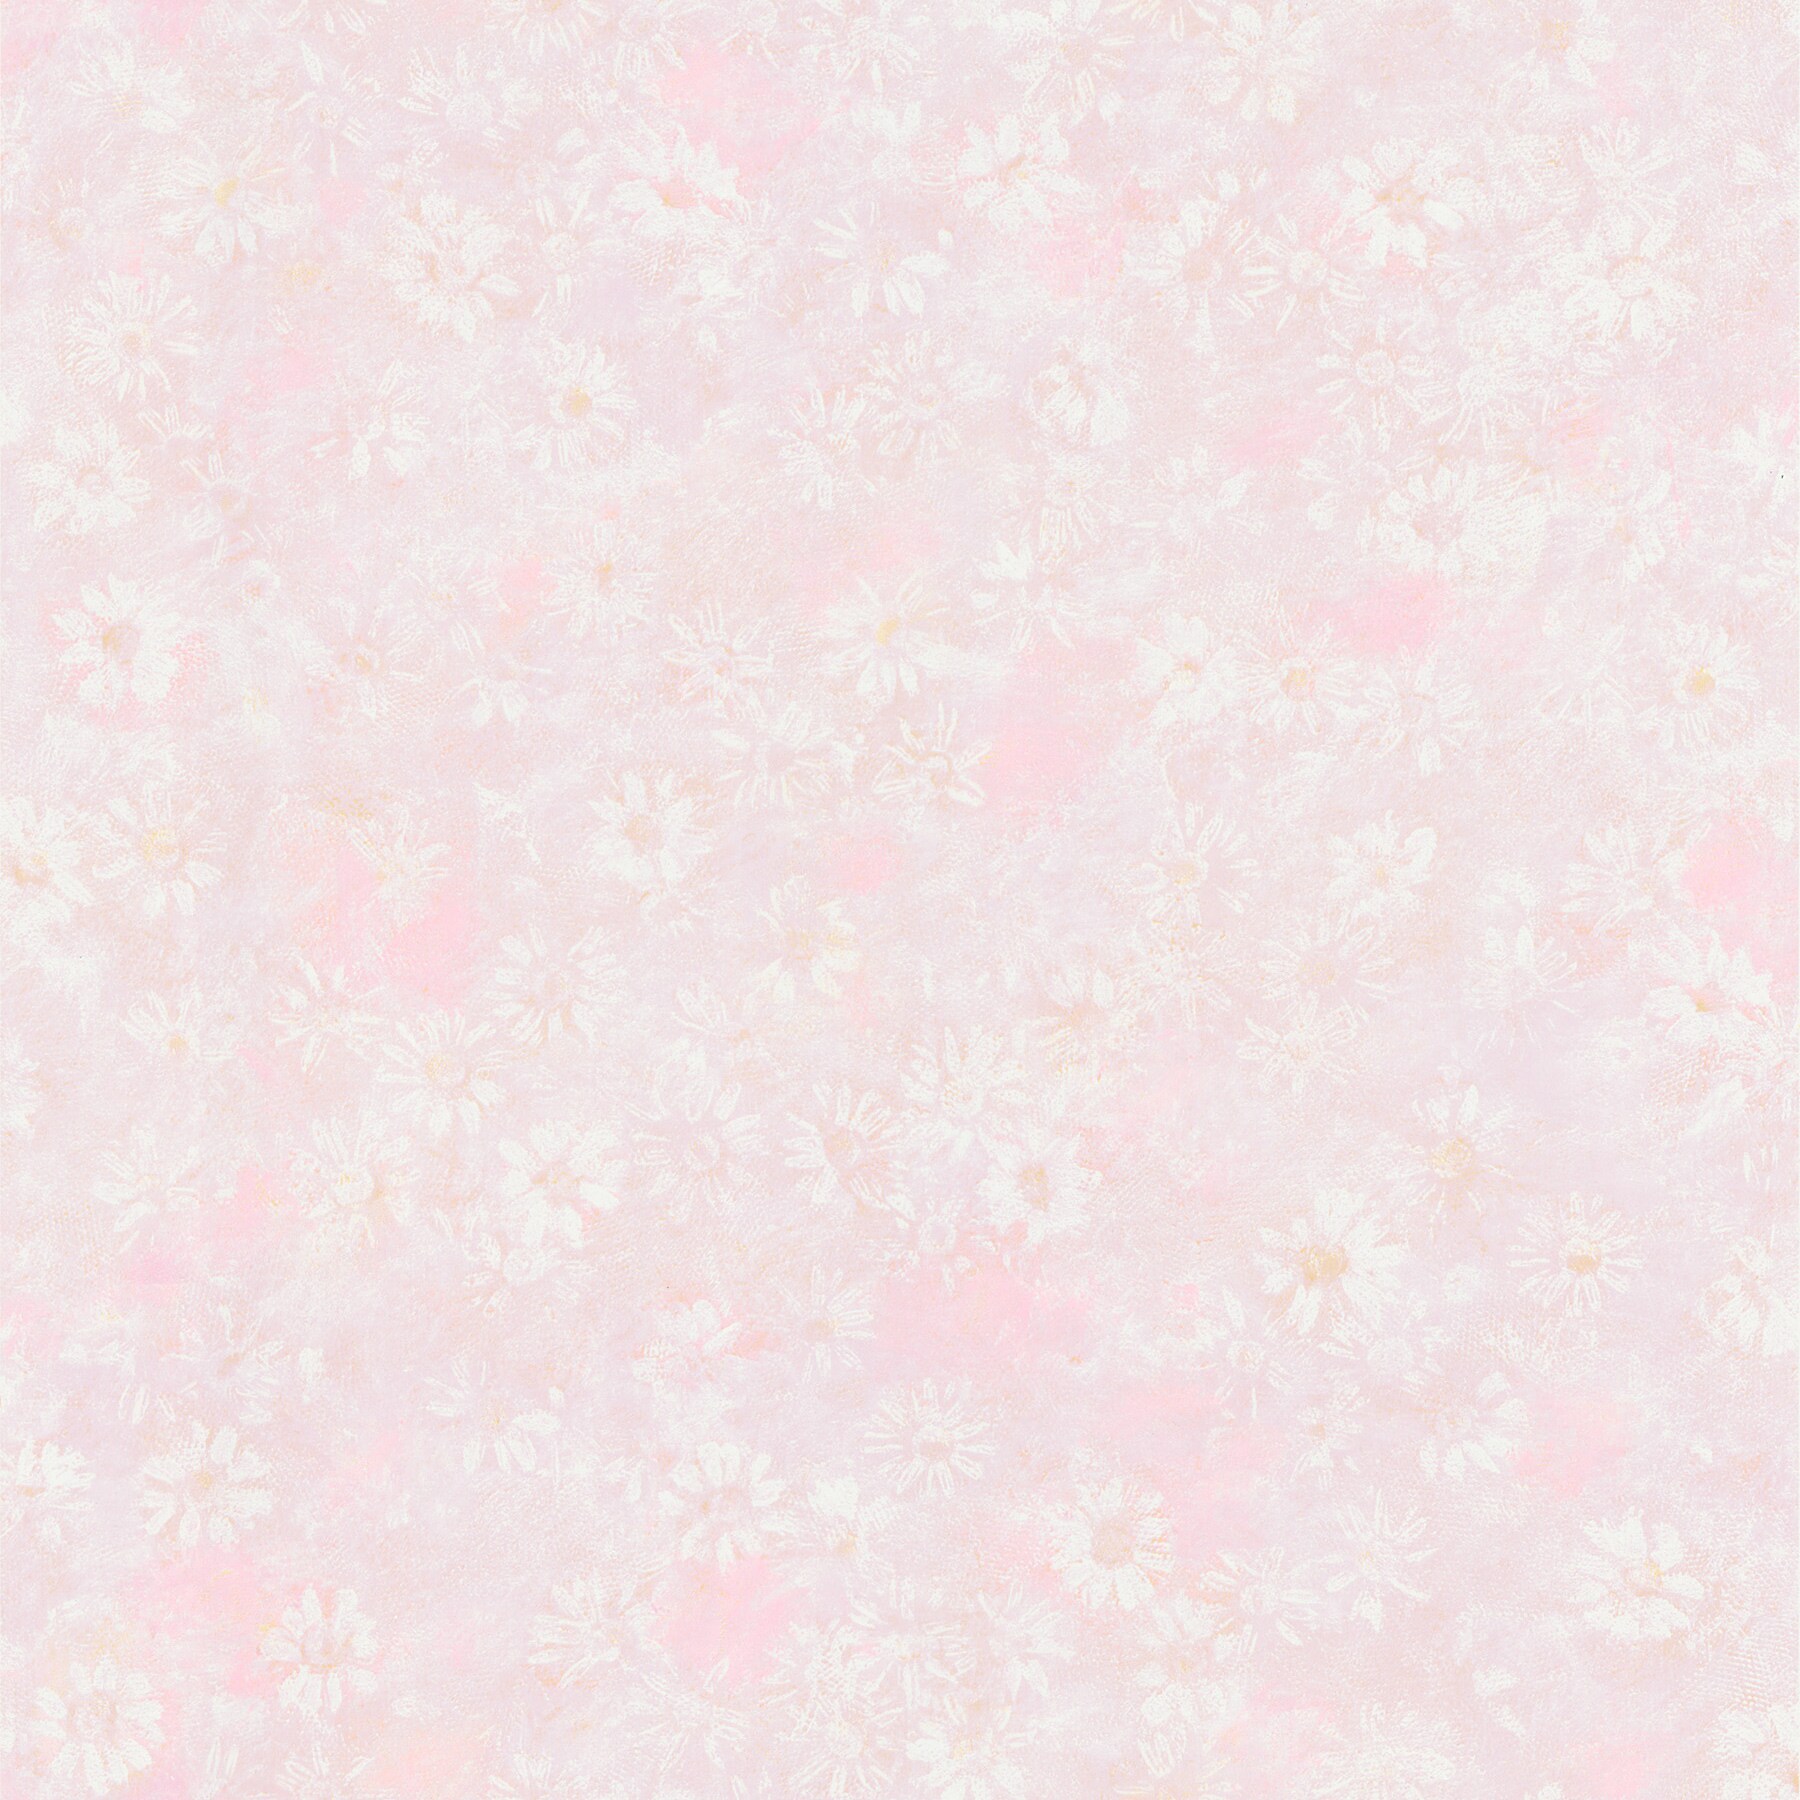 Brewster Pink Daisy Texture Wallpaper (PinkDimensions 20.5 inches wide x 33 feet longBoy/Girl/Neutral GirlTheme TraditionalMaterials Solid Sheet VinylCare Instructions ScrubbableHanging Instructions PrepastedRepeat 21 inchesMatch Drop )